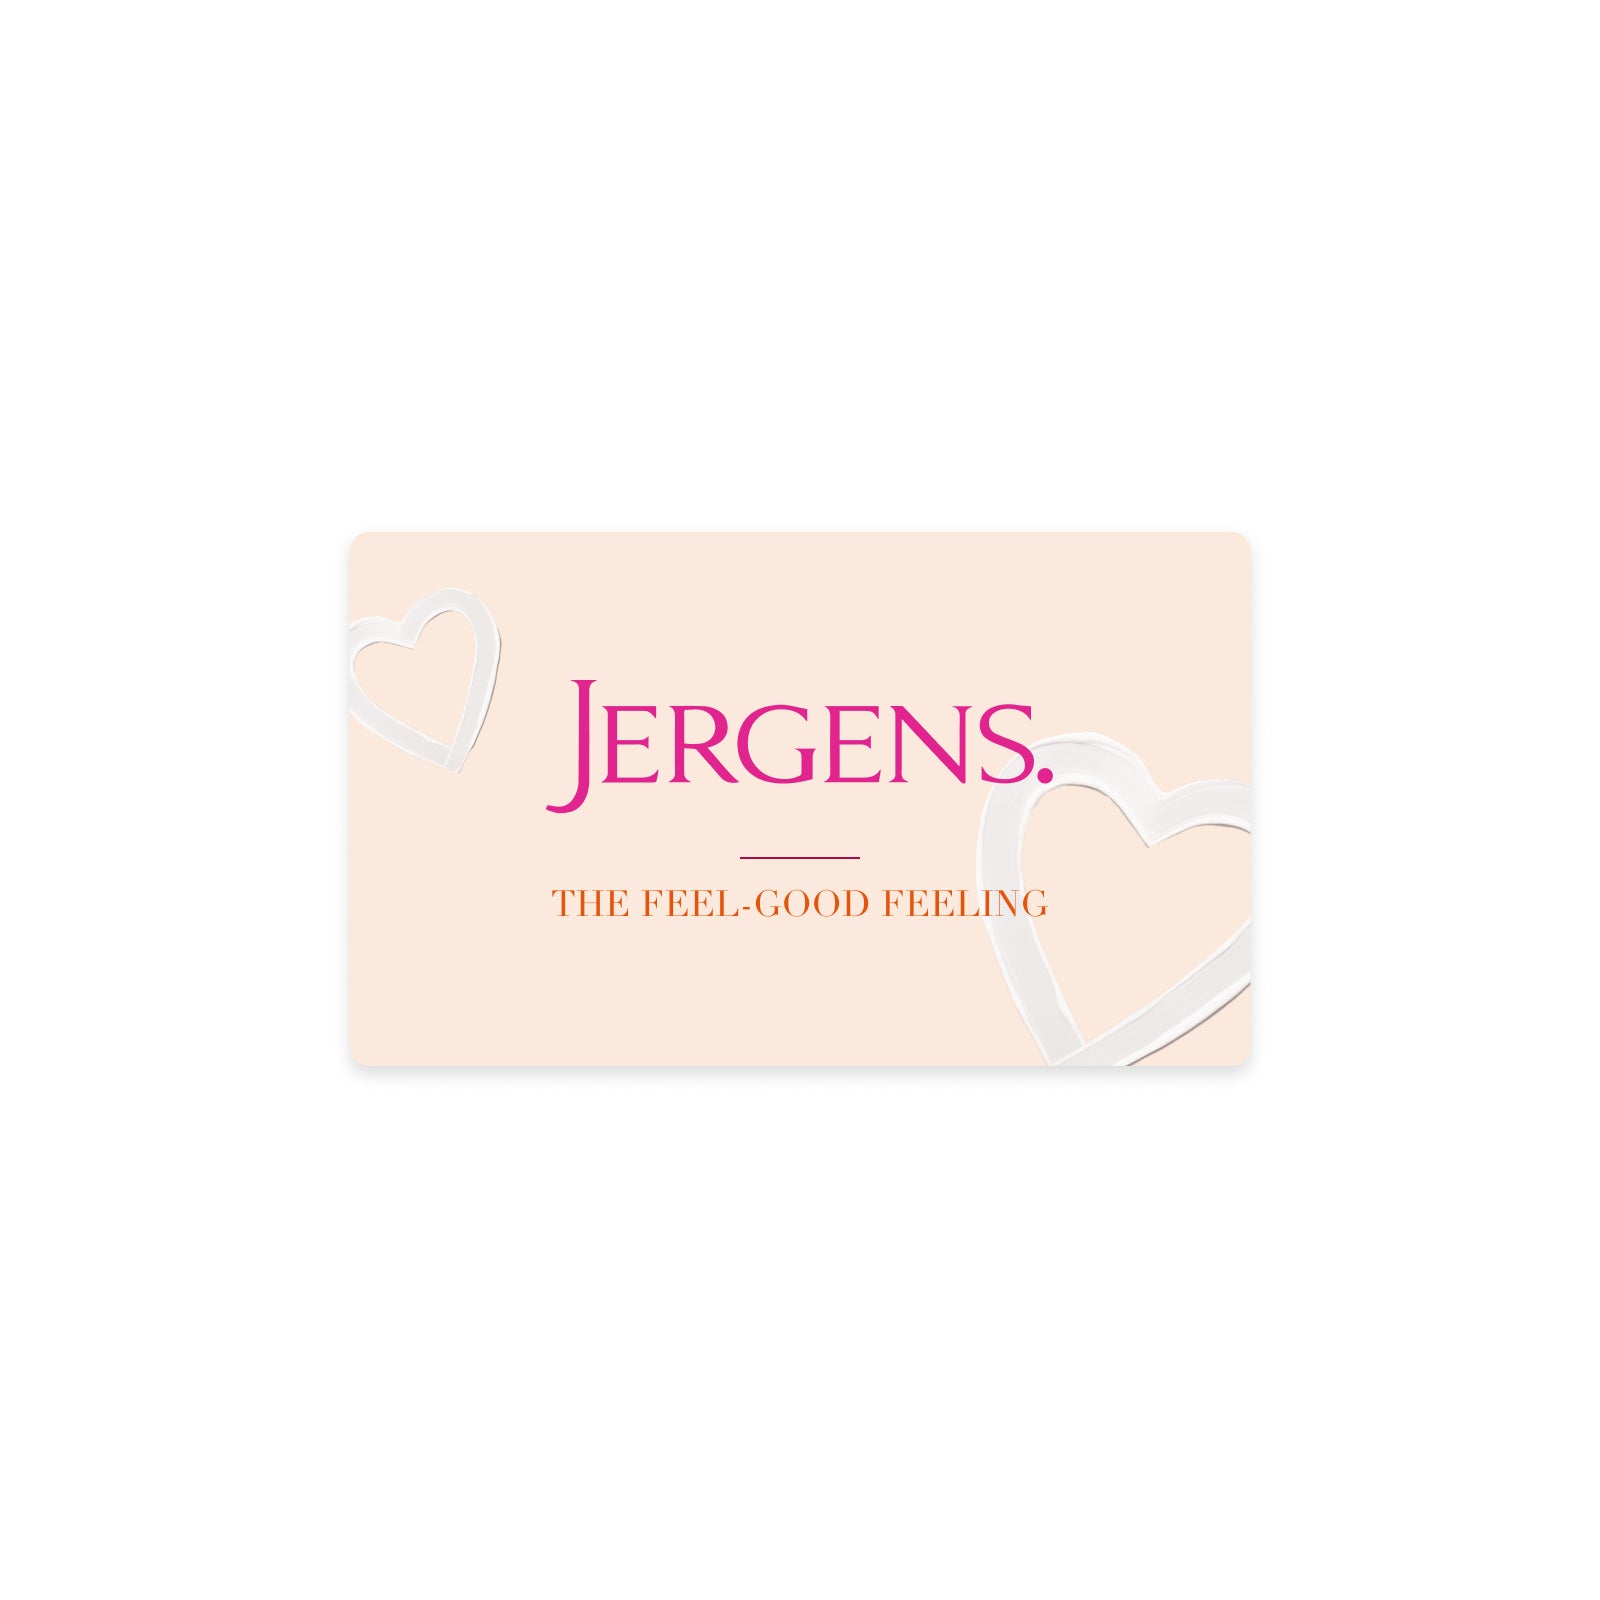 Jergens Gift Card